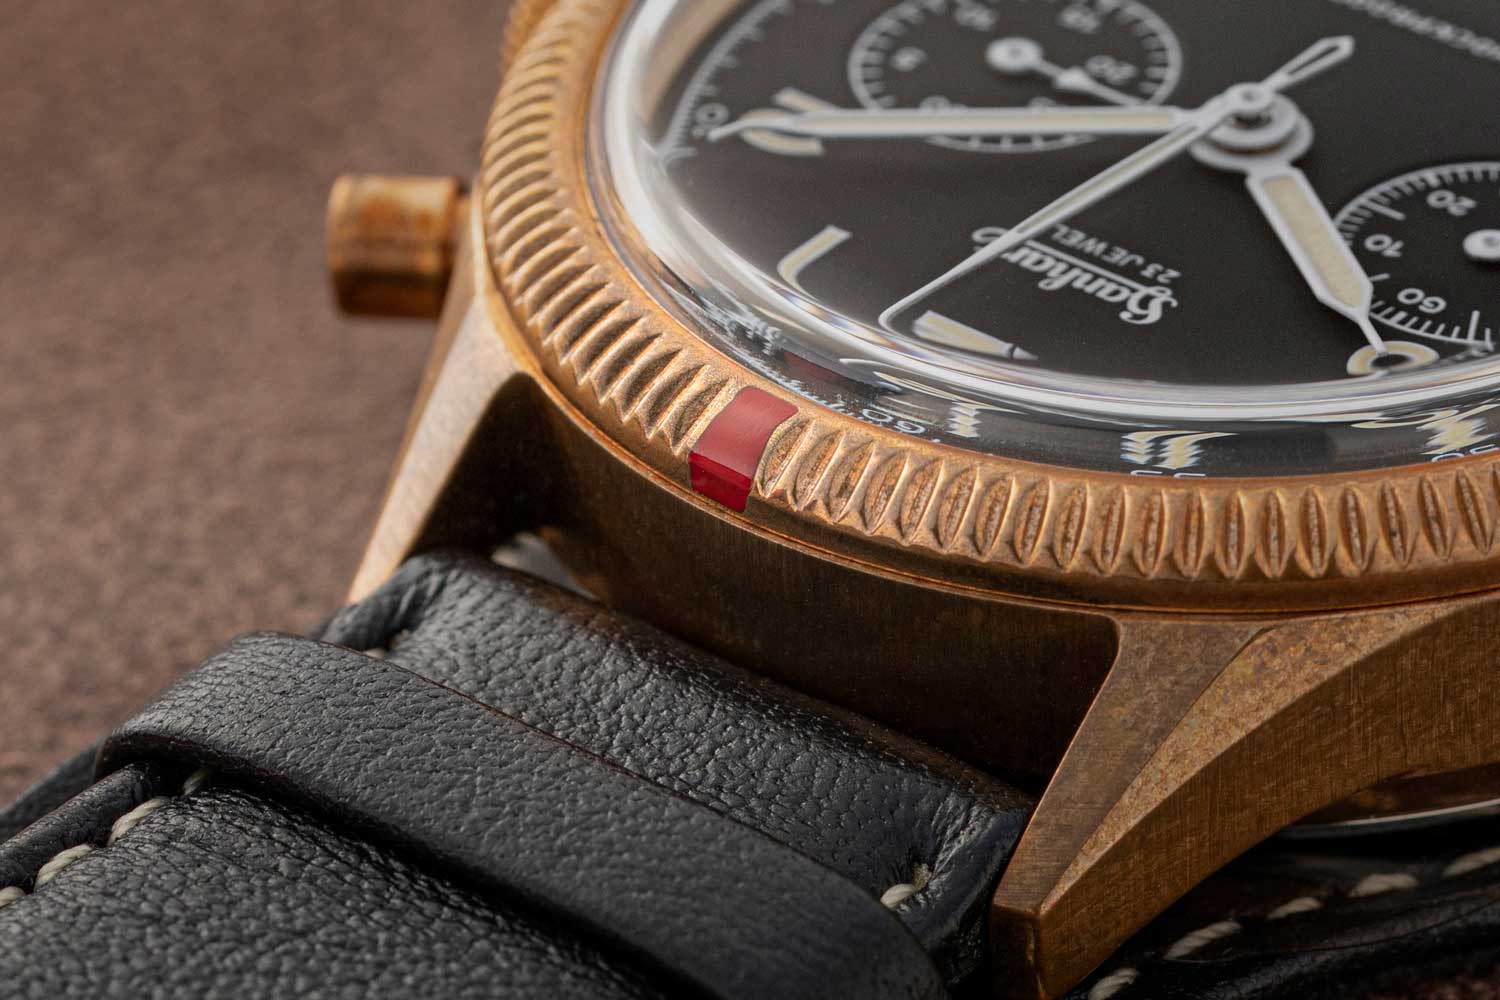 Hand assembled at Hanhart's workshops, The Rake & Revolution Limited Edition Bronze 417 Chronograph is offered on a quick-patinating bronze CuSn8 case